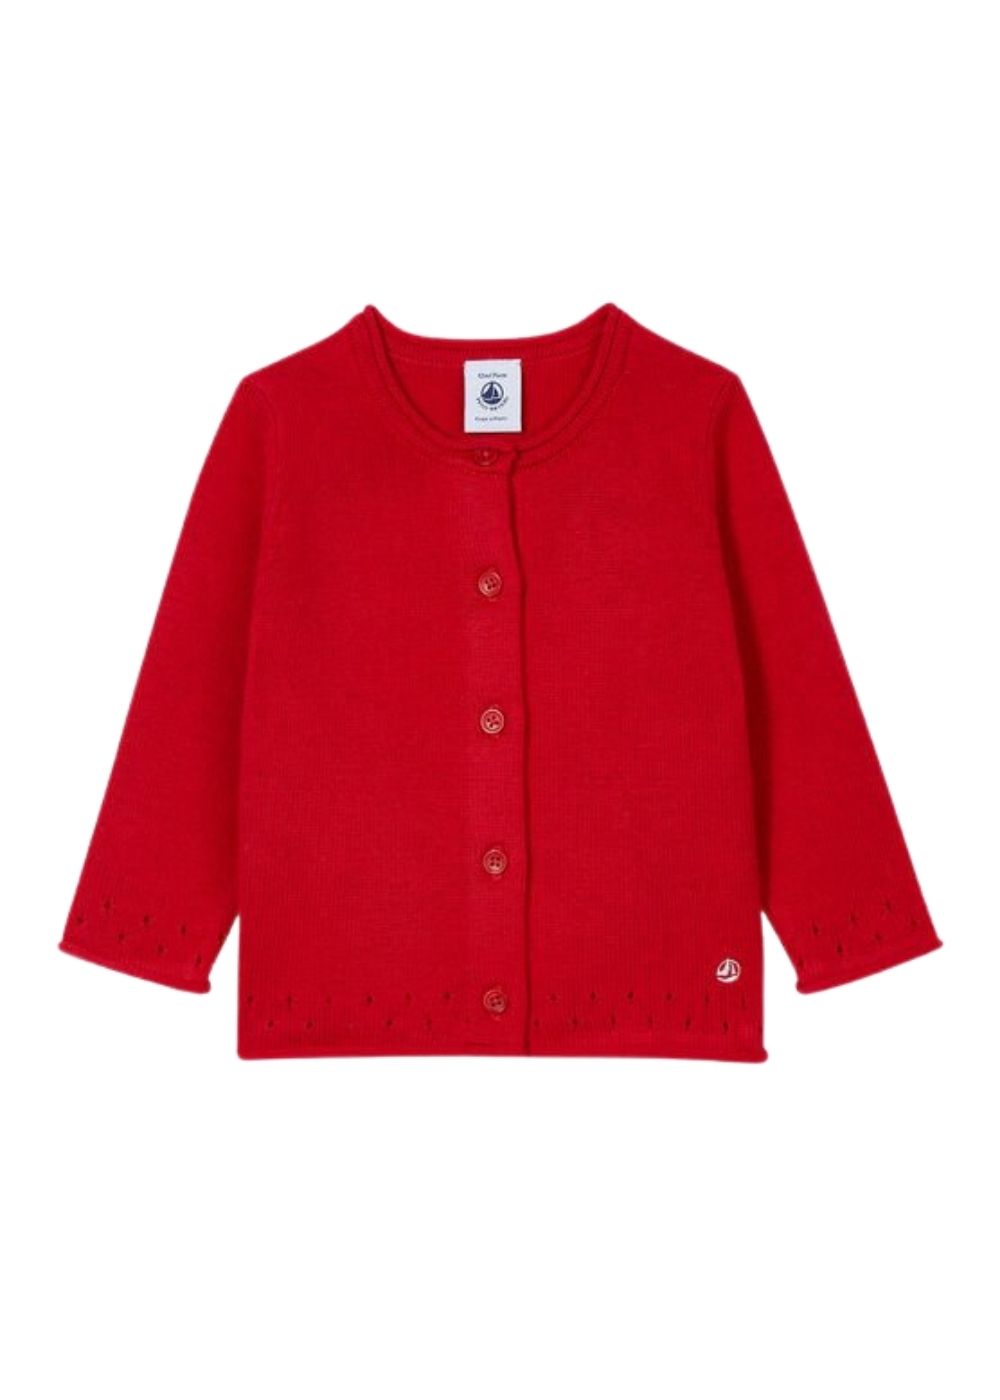 Featured image for “PETIT BATEAU CARDIGAN IN TRICOT”